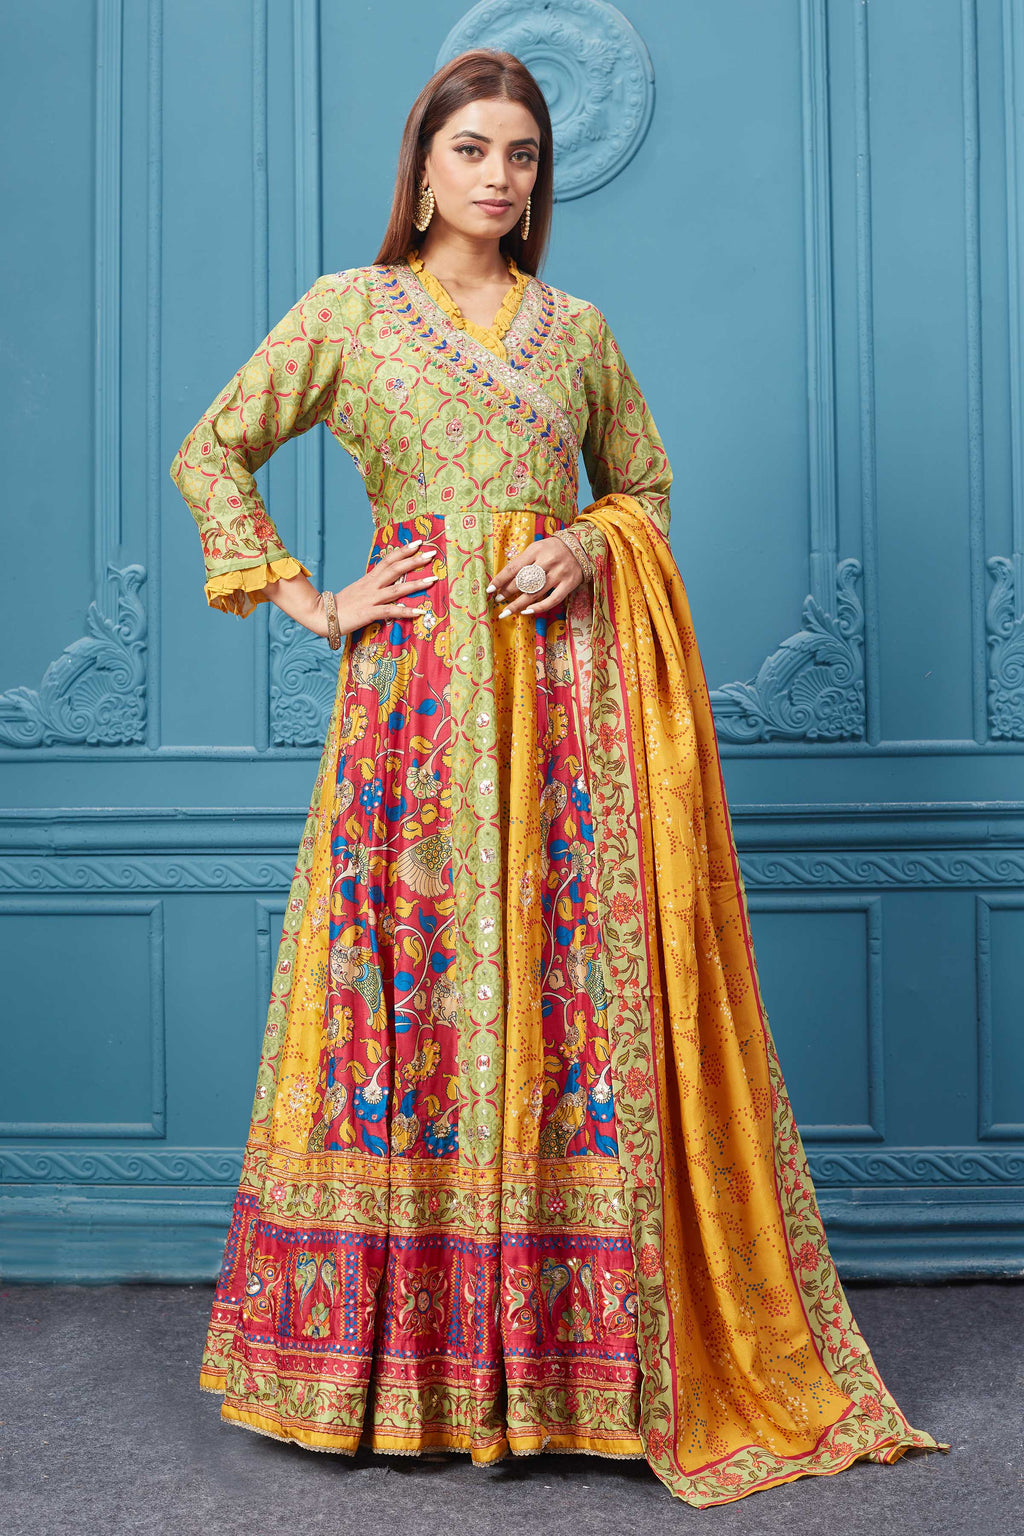 Buy a Beautiful yellow embroidered silk Anarkali suit with a dupatta. Shop online from Pure Elegance. Dazzle on weddings and special occasions with exquisite Indian designer dresses, sharara suits, Anarkali suits, and wedding lehengas from Pure Elegance Indian fashion store in the USA.